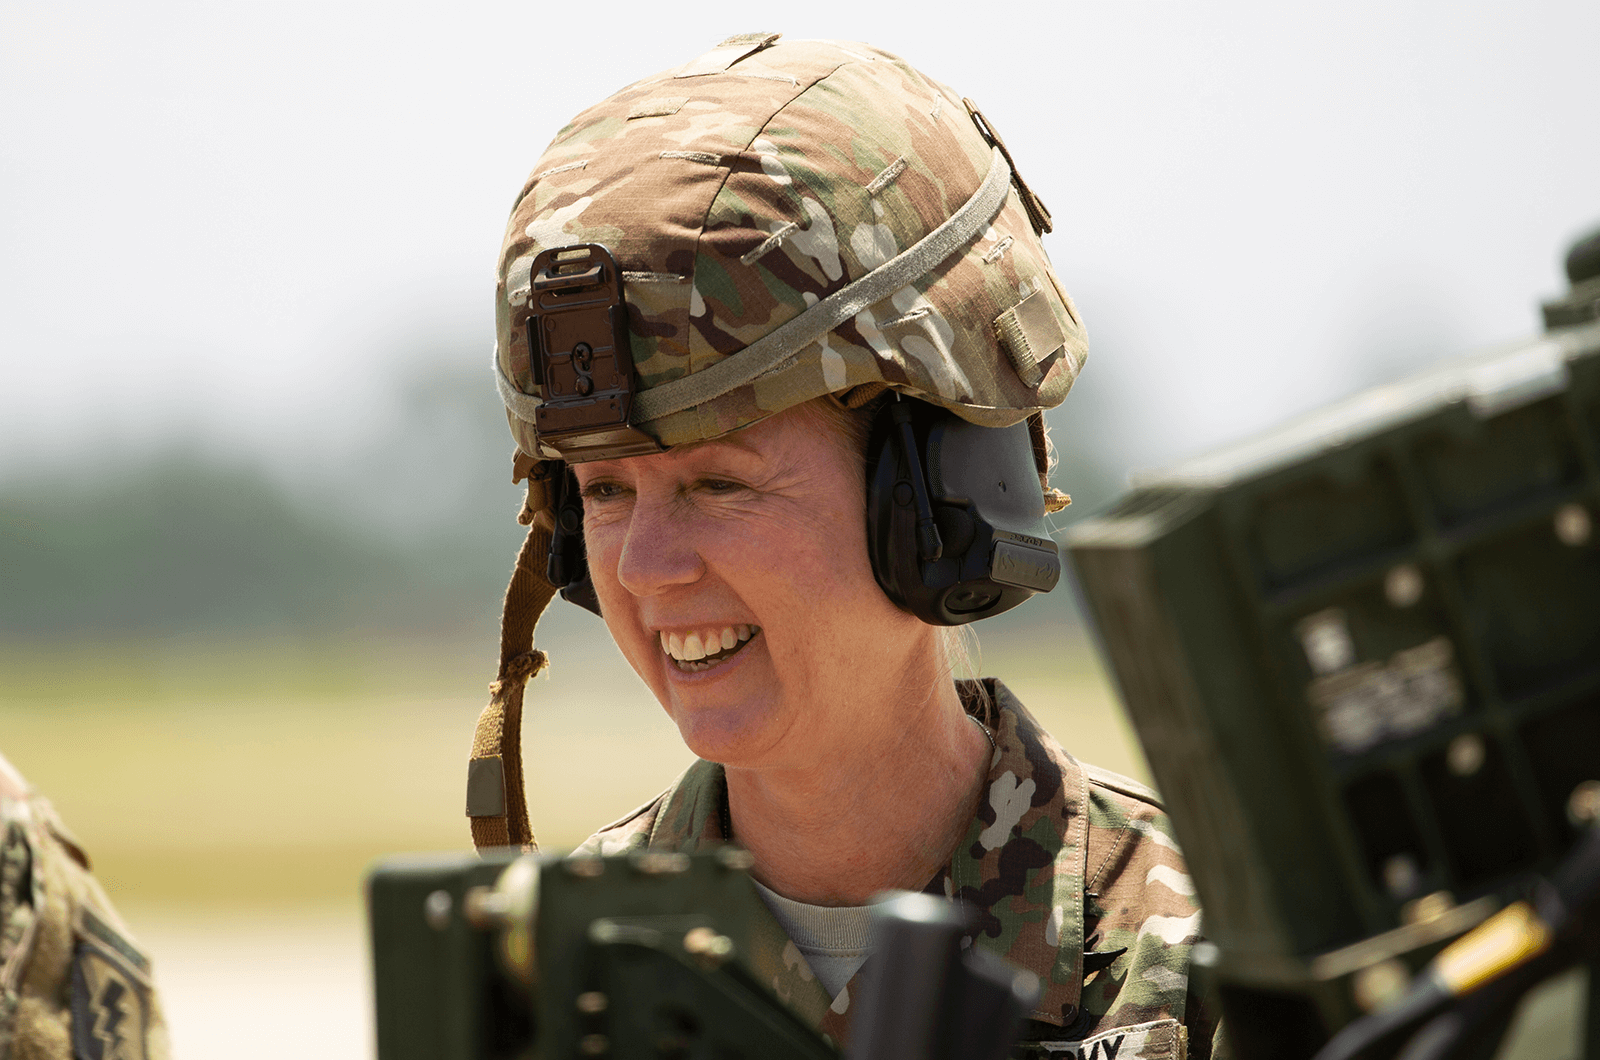 U.S. Army Maj. Gen. Laura Yeager takes command of the California Army National Guard's 40th Infantry Division during a ceremony on June 29, 2019, at Joint Forces Training Base in Los Alamitos, California. Yeager is the first woman to command a U.S. Army infantry division.    *Photos by the California National Guard